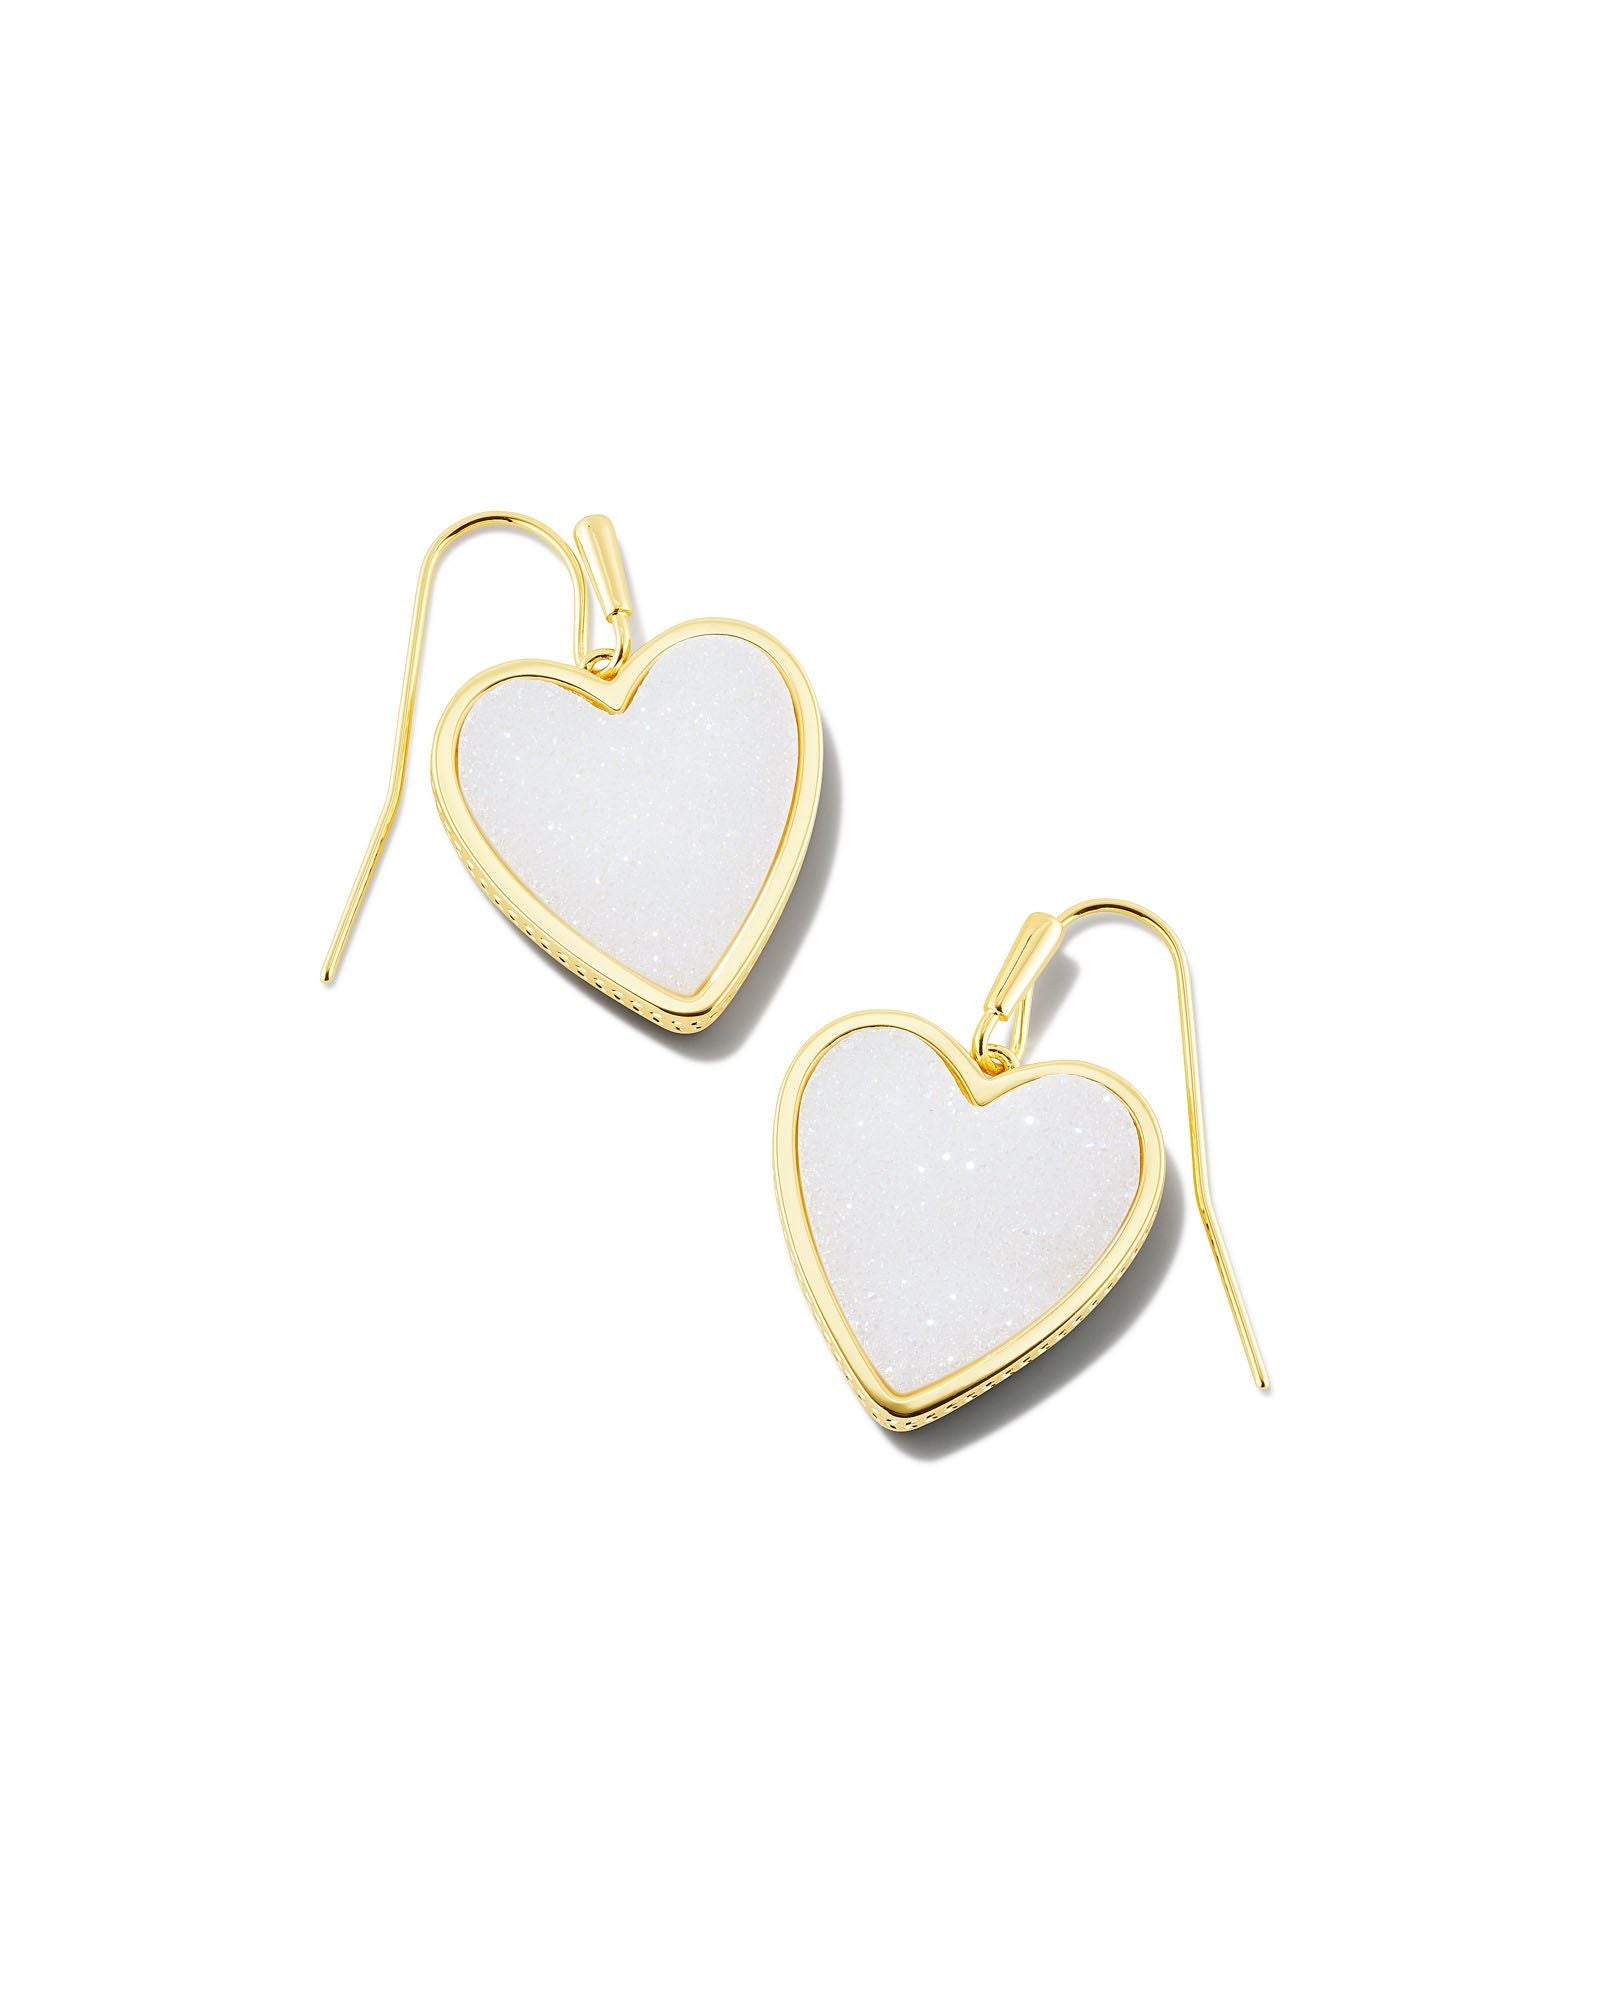 Heart Drop Earring in Gold Iridescent Drusy